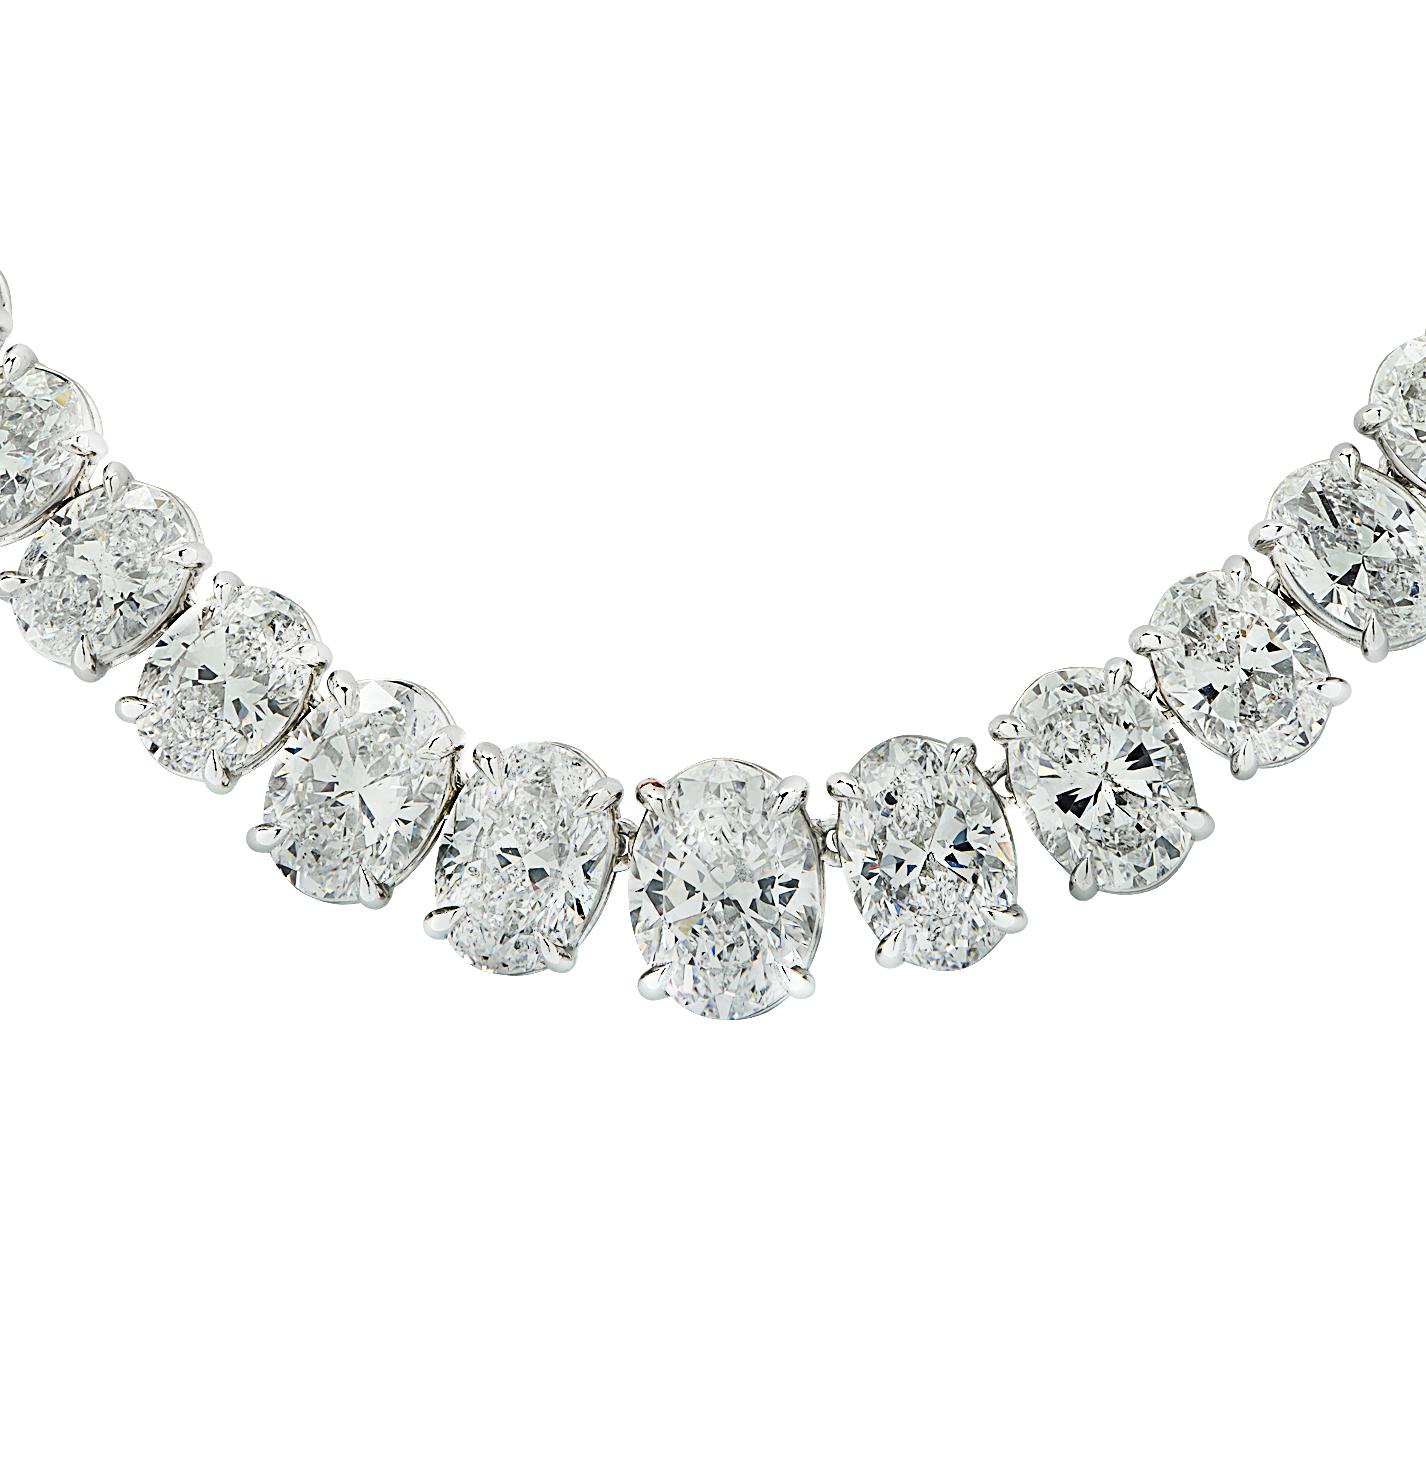 Emerging from the esteemed atelier of Vivid Diamonds, this captivating Riviera diamond necklace manifests the pinnacle of artistry and refinement. Meticulously shaped in platinum, it magnificently exhibits a constellation of 73 GIA Certified